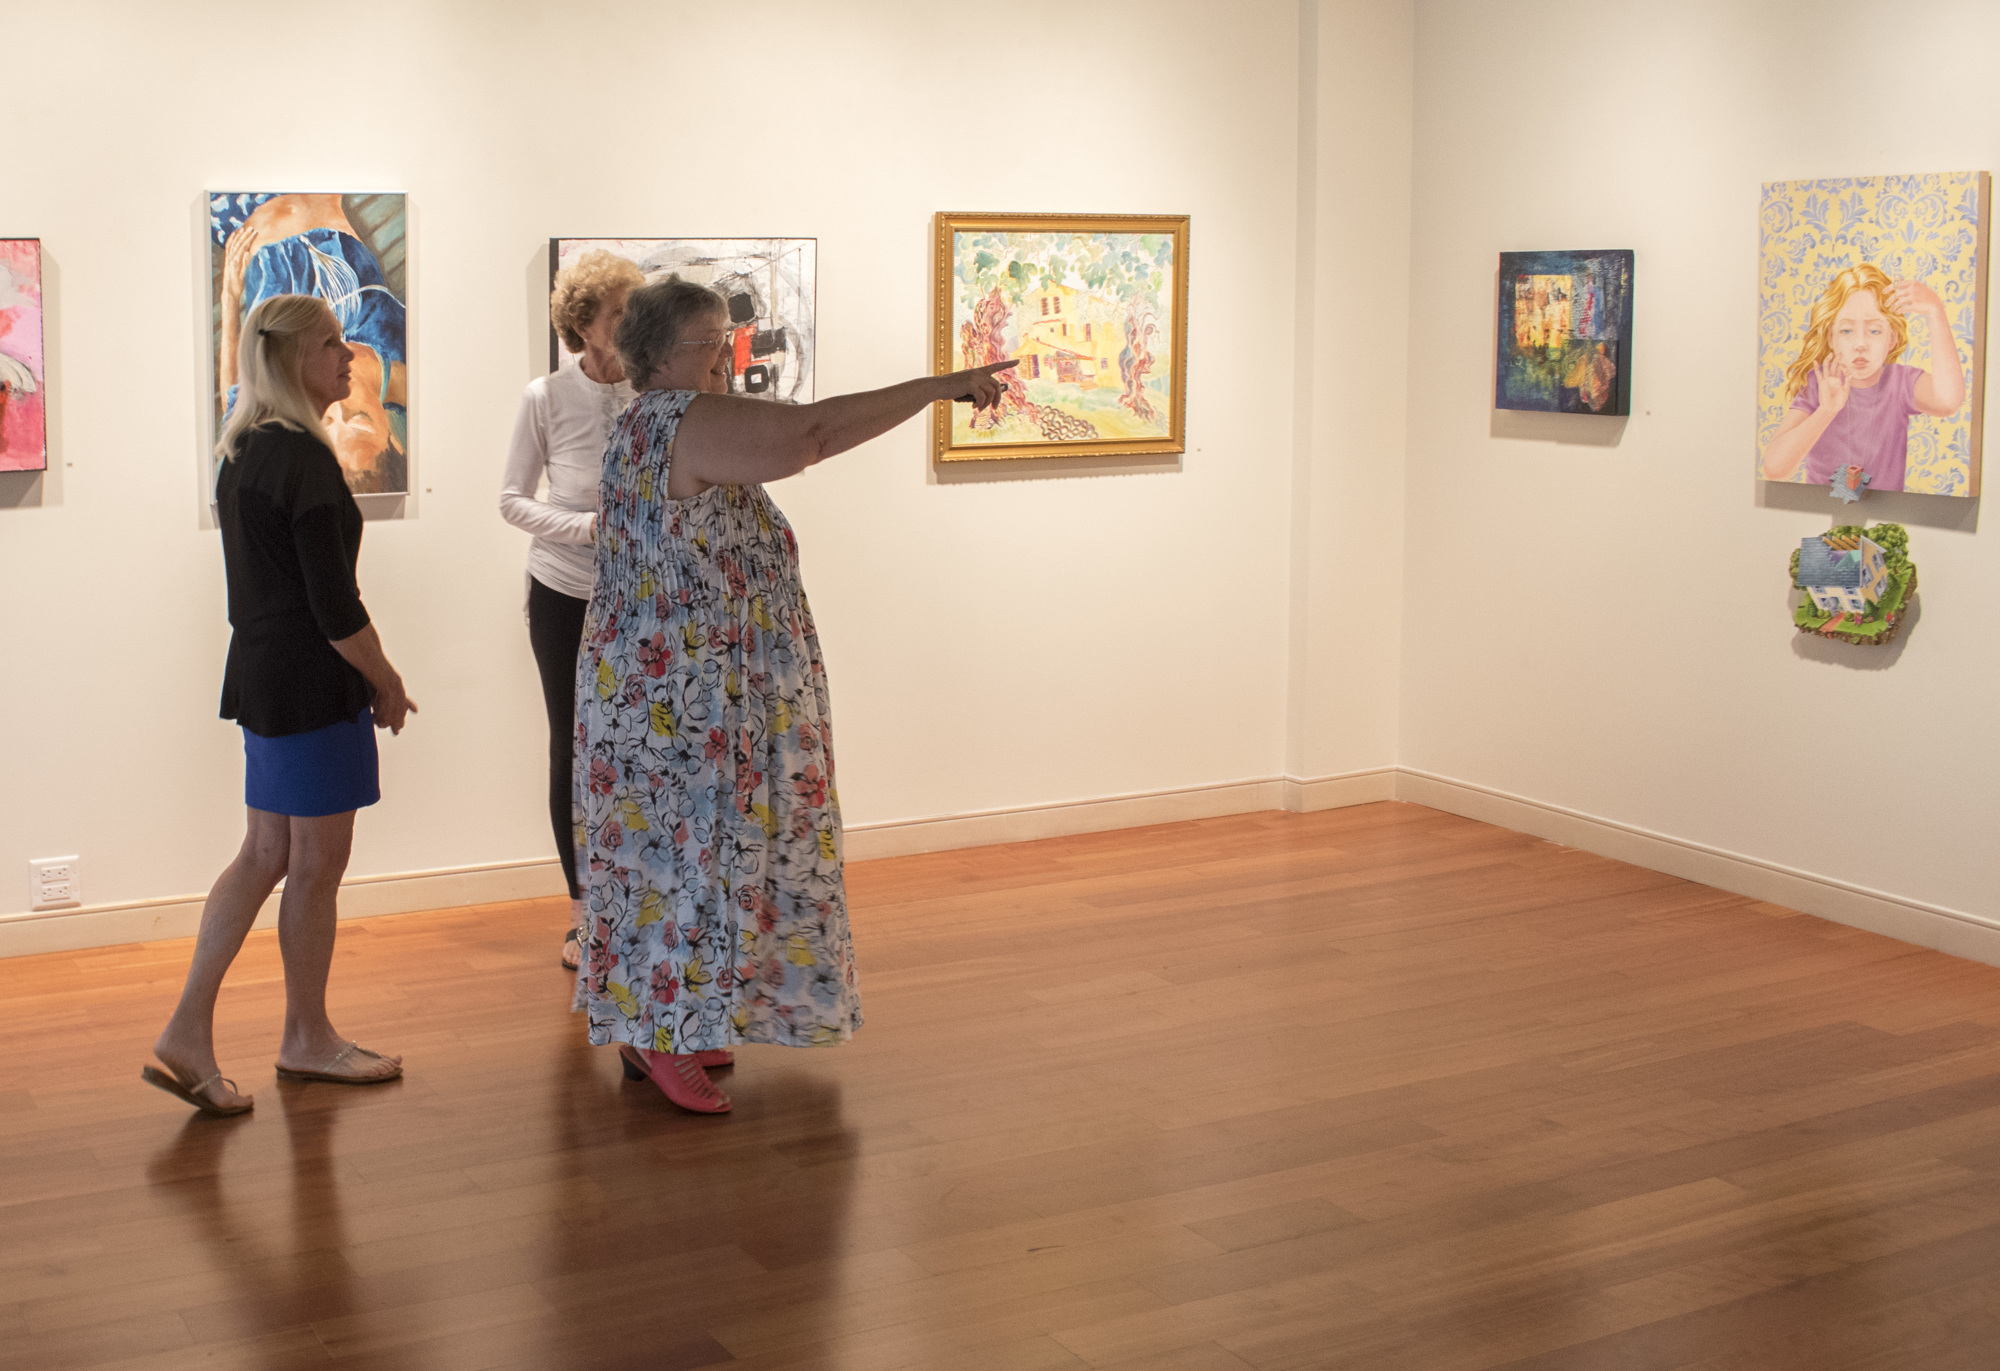 The Sarasota Pen Women exhibit at Ringling College of Art and Design runs through June 22 in the Richard and Barbara Basch Gallery and Willis Smith Gallery. Photo by Niki Kottmann